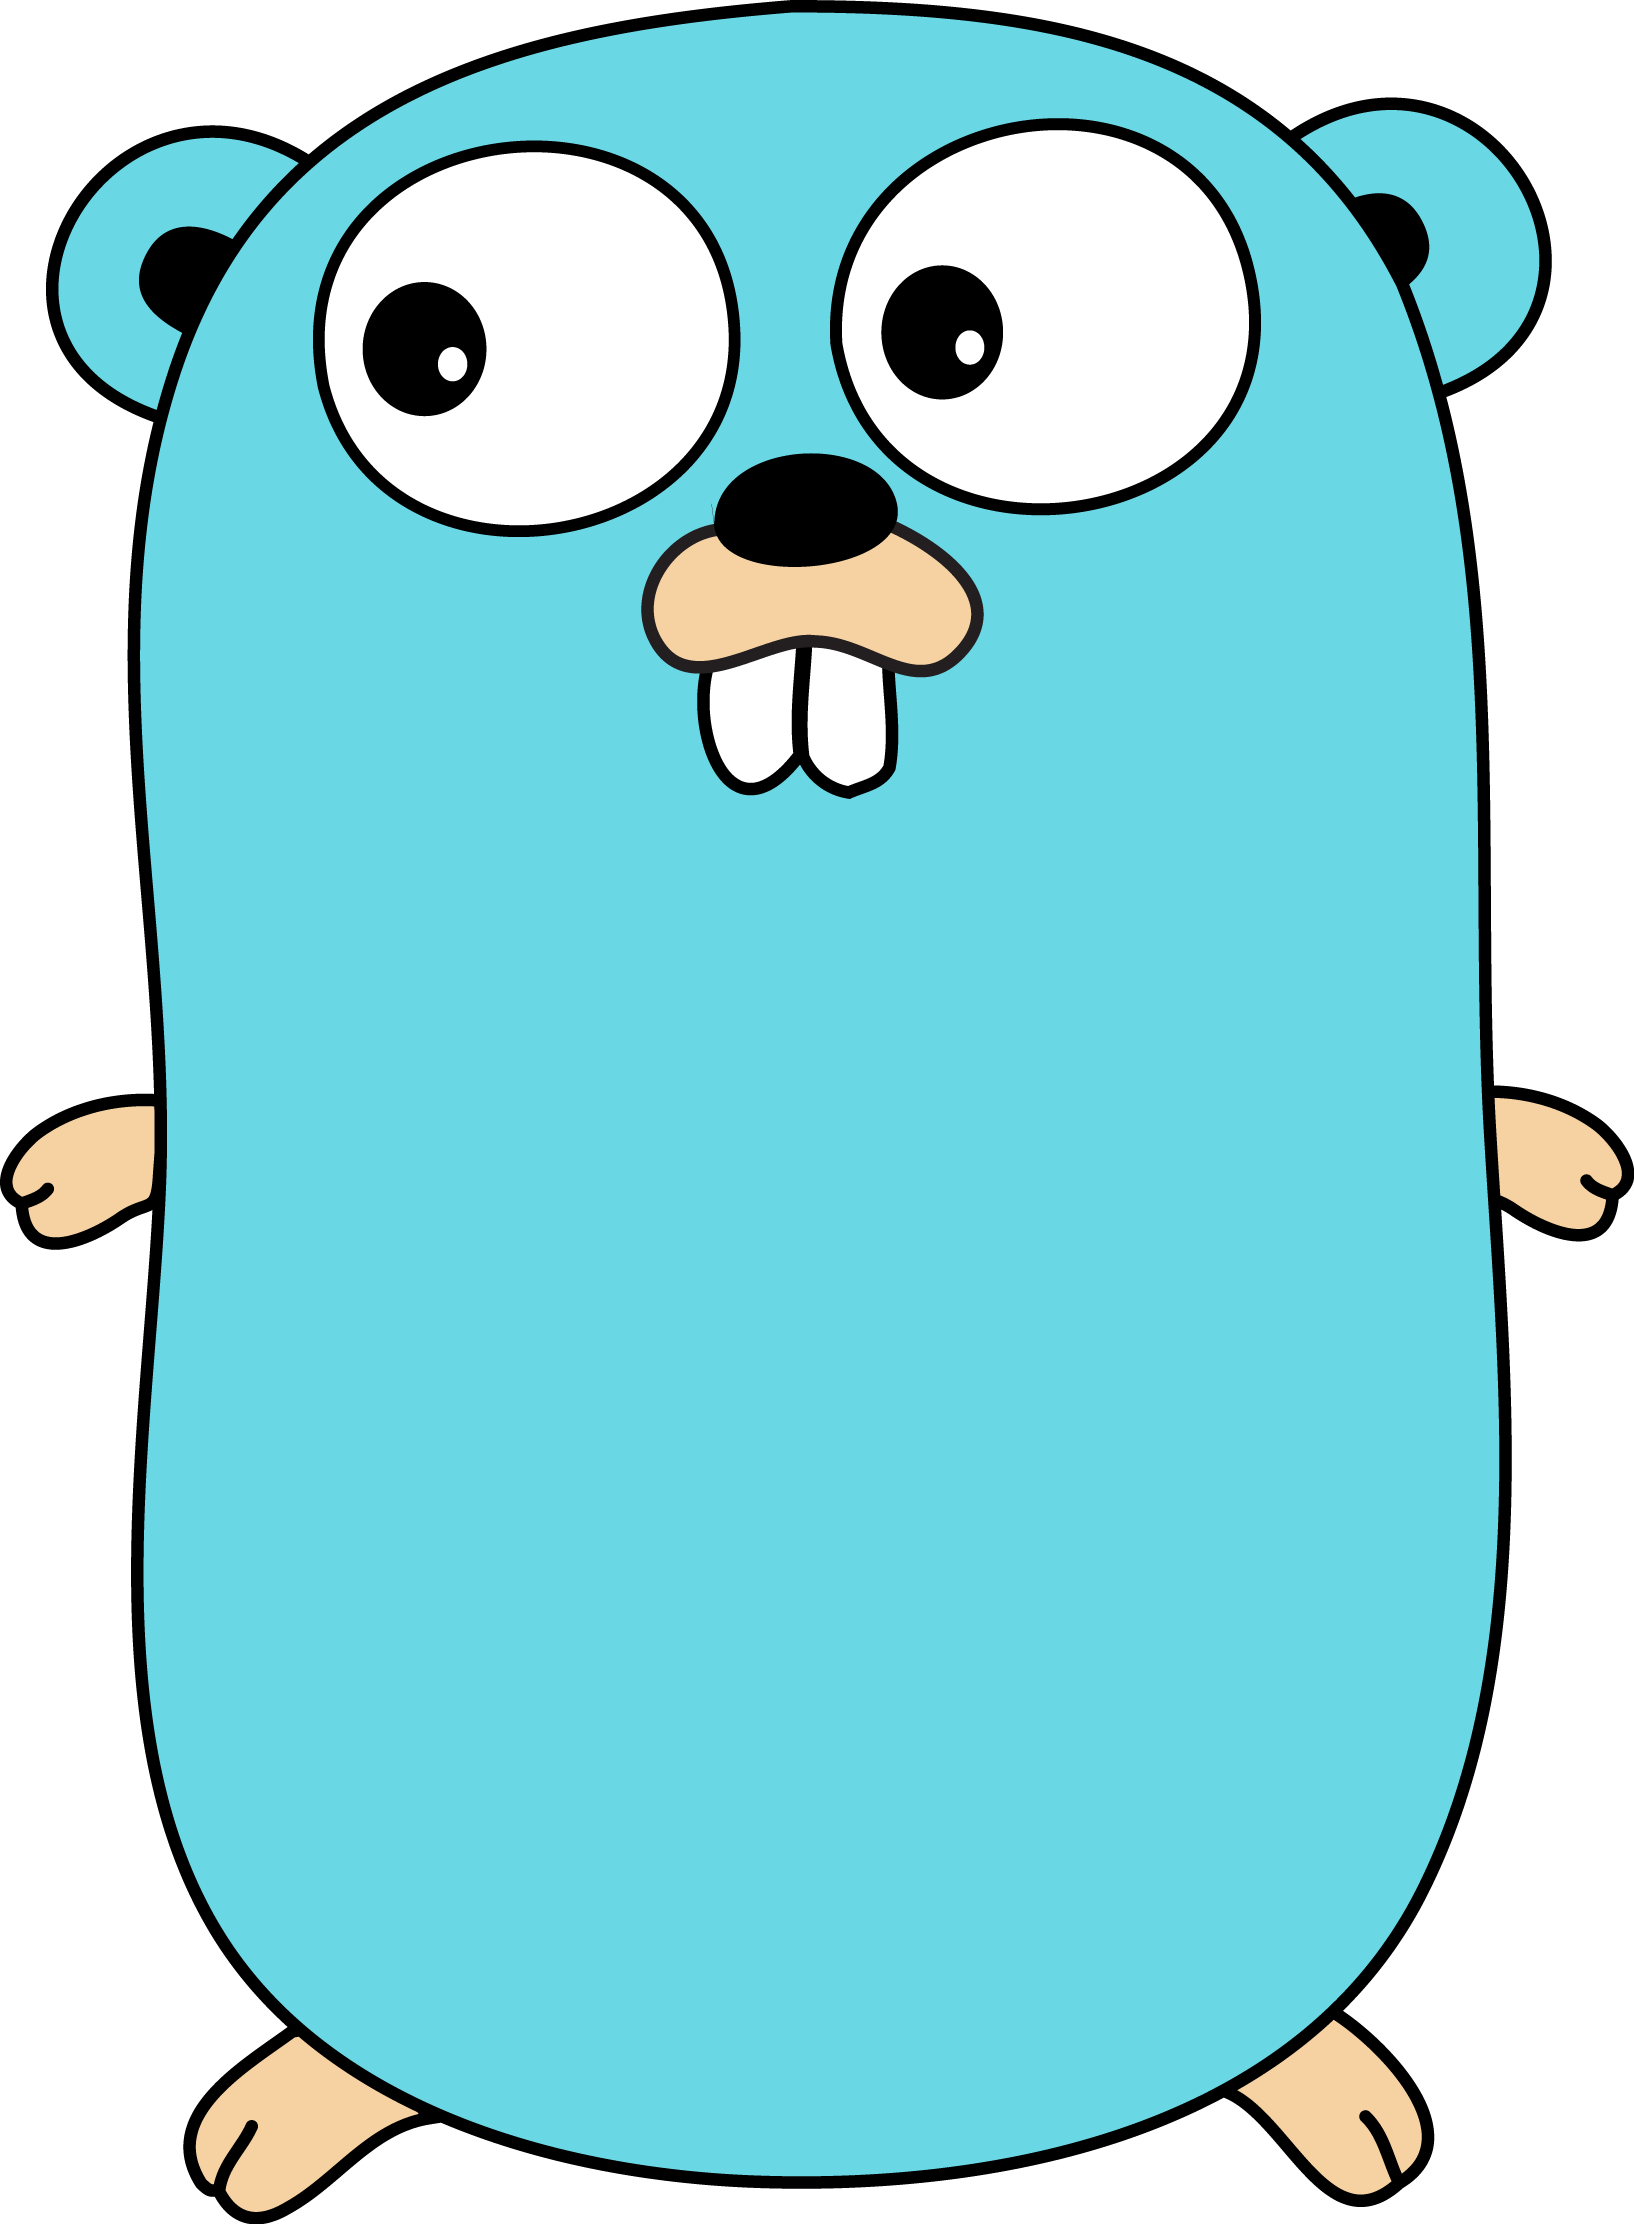 Gopher readme md at. Hamster clipart vector